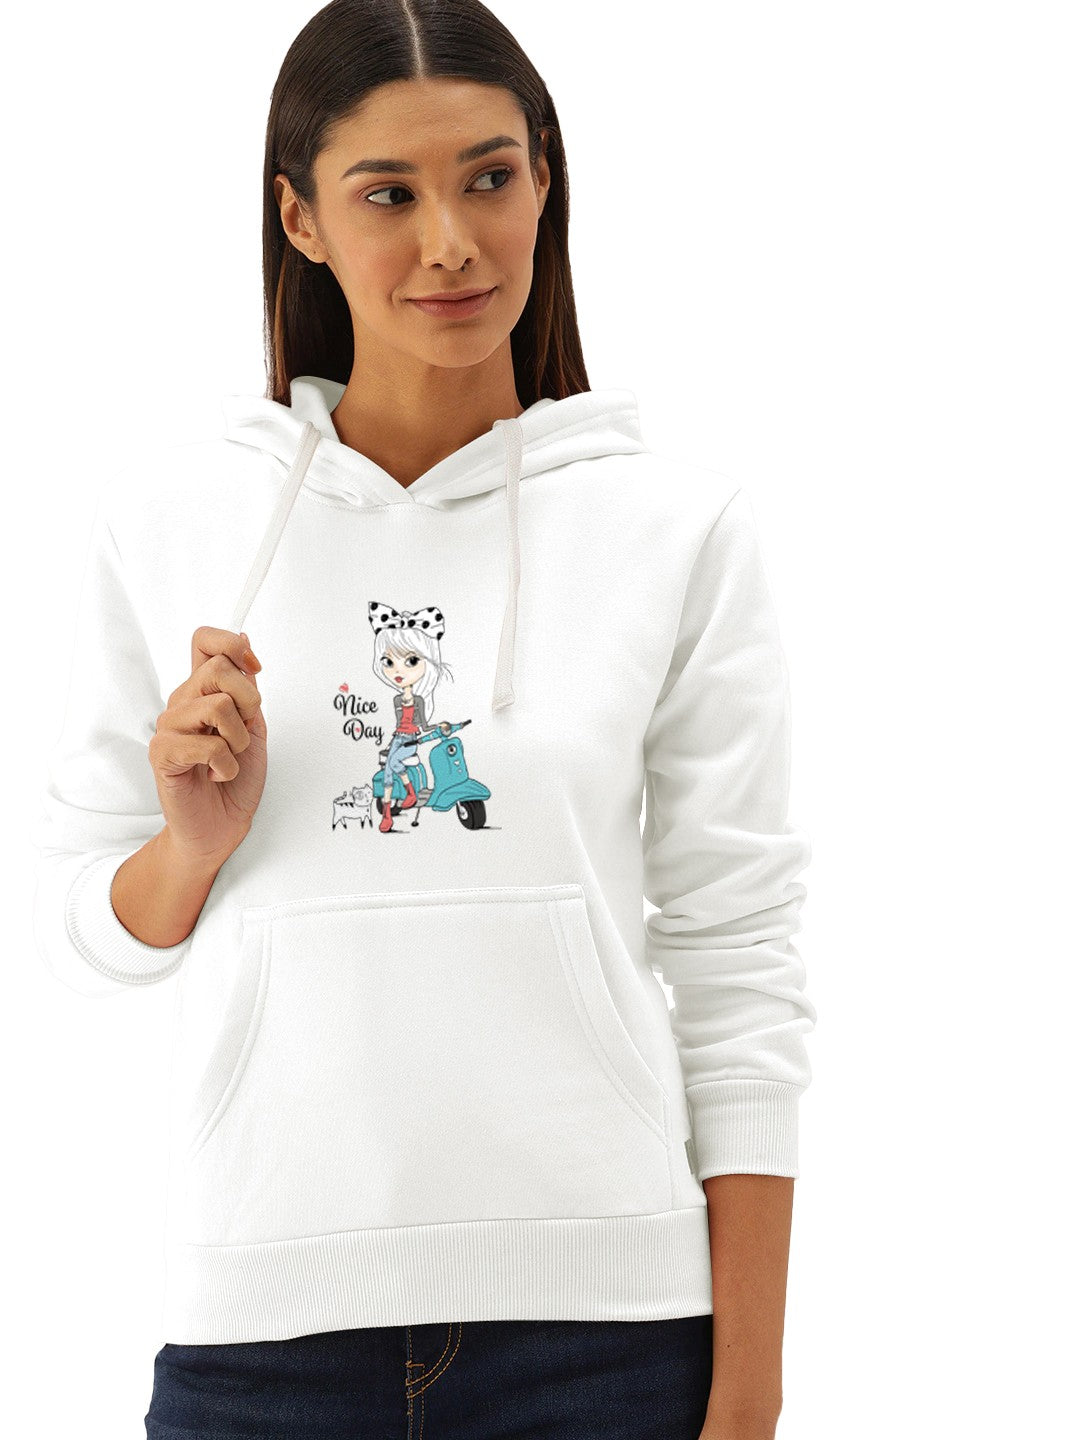 Nice Day Printed Premium Quality Hoodie For Women